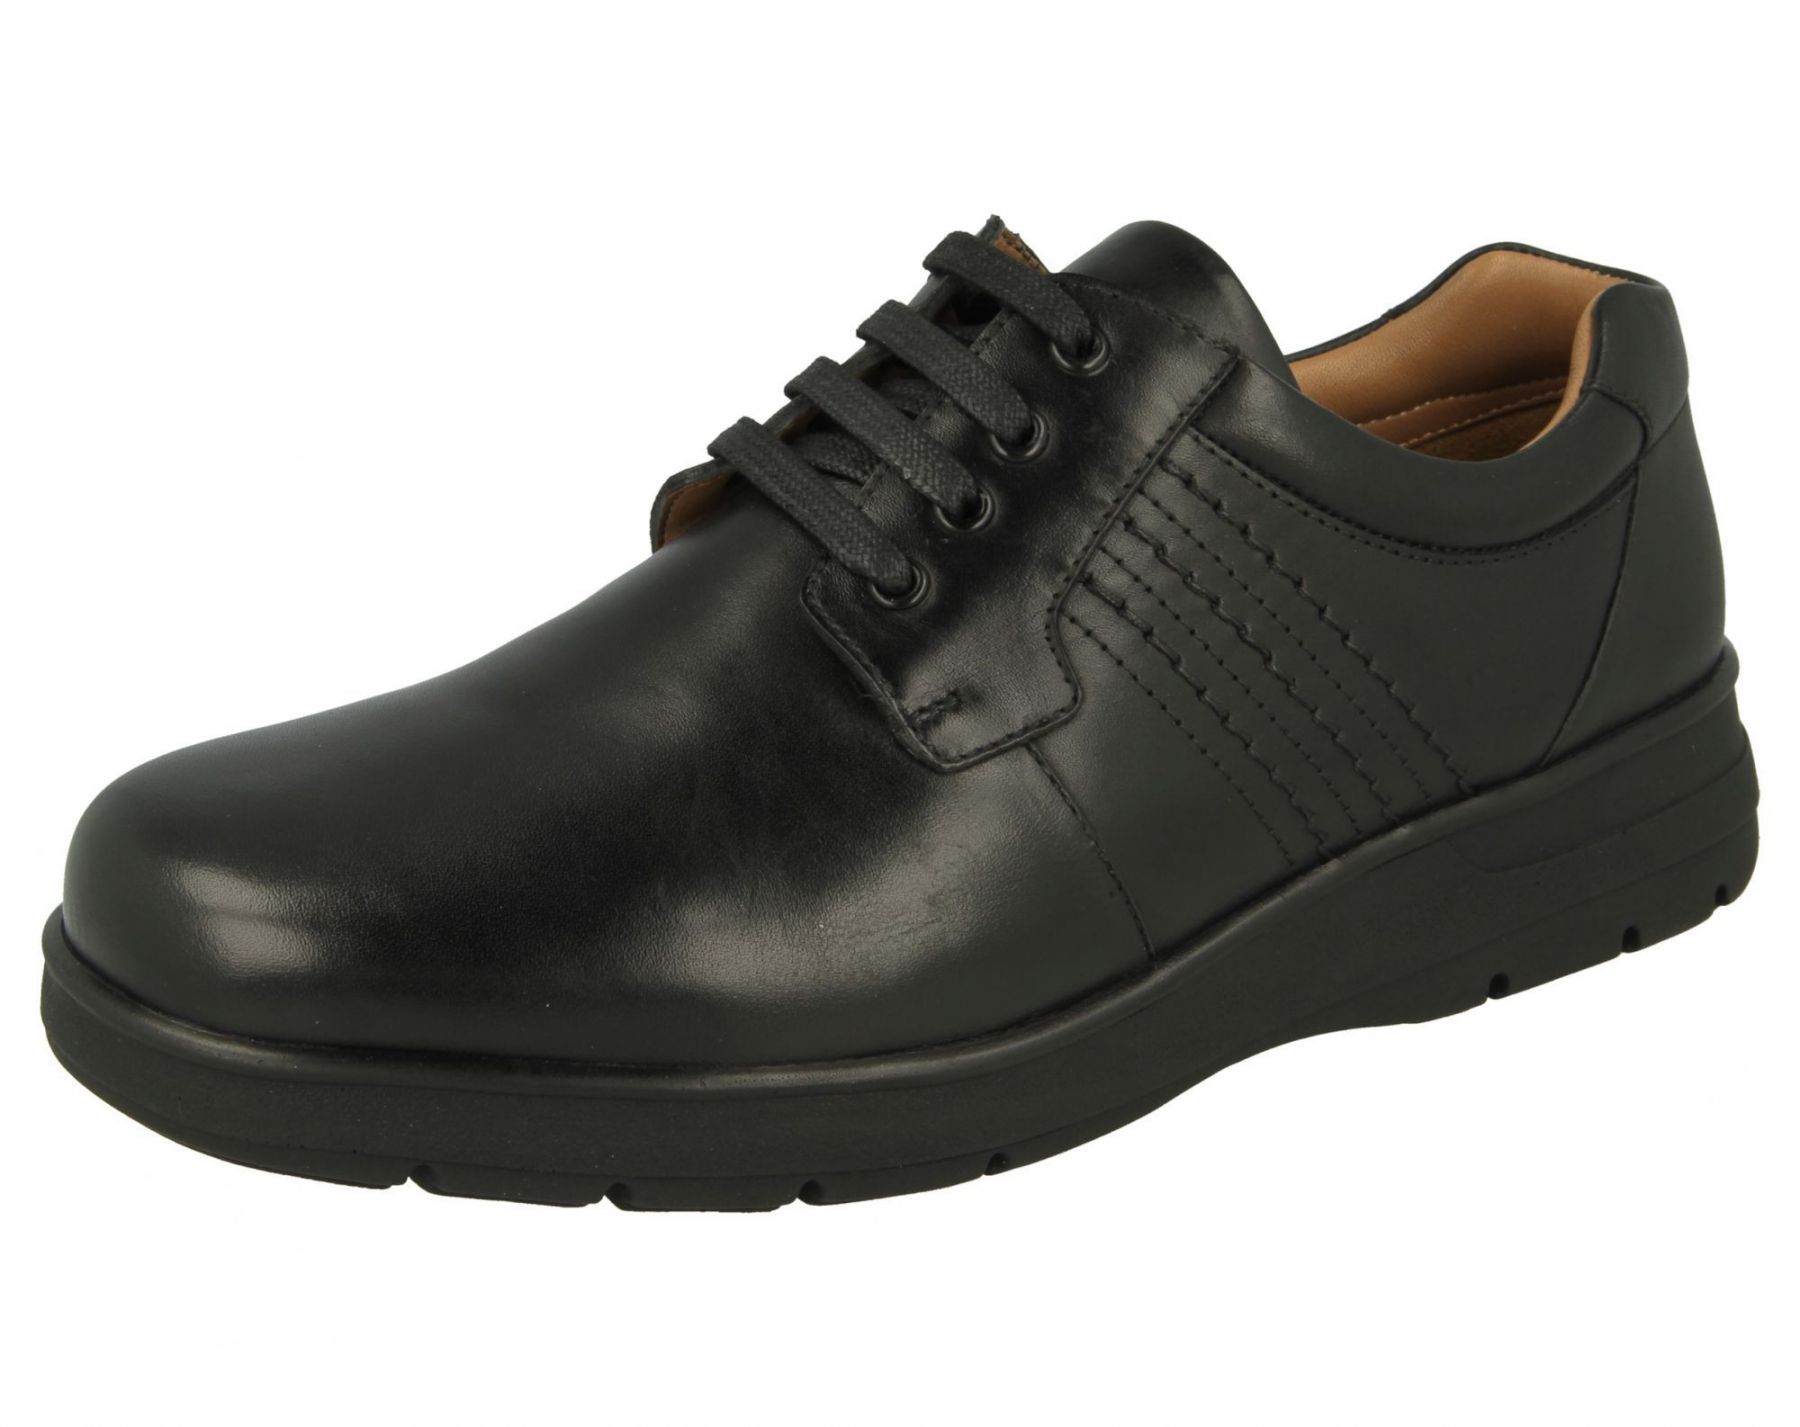 Men's DB Wider Fit Chatham Leather Lace-Up Shoes - Black